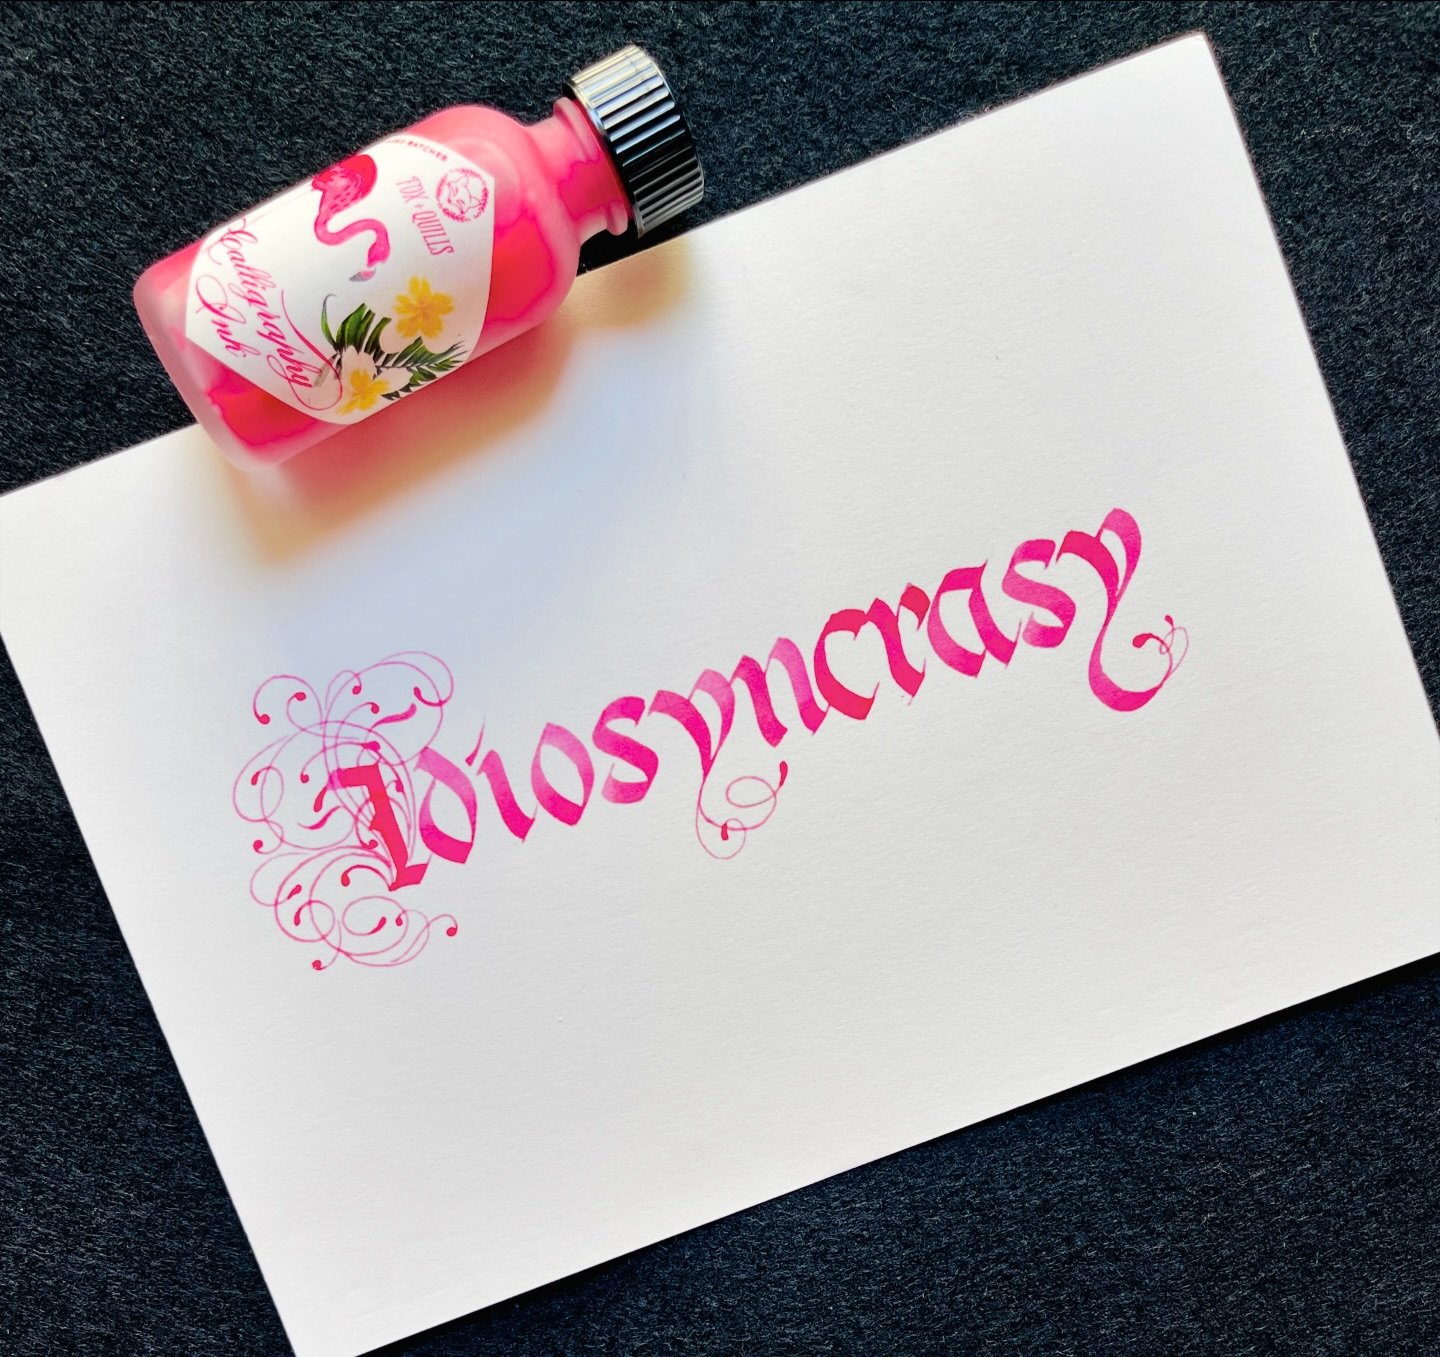 Idiosyncrasy - a mode of behaviour or way of thought peculiar to an individual. 
I am extremely grateful to Nina @anintran for making me fall in love with Gothicized Italic. The only Blackletter script I love. Thank you Nina 😊 I am slowly improving 